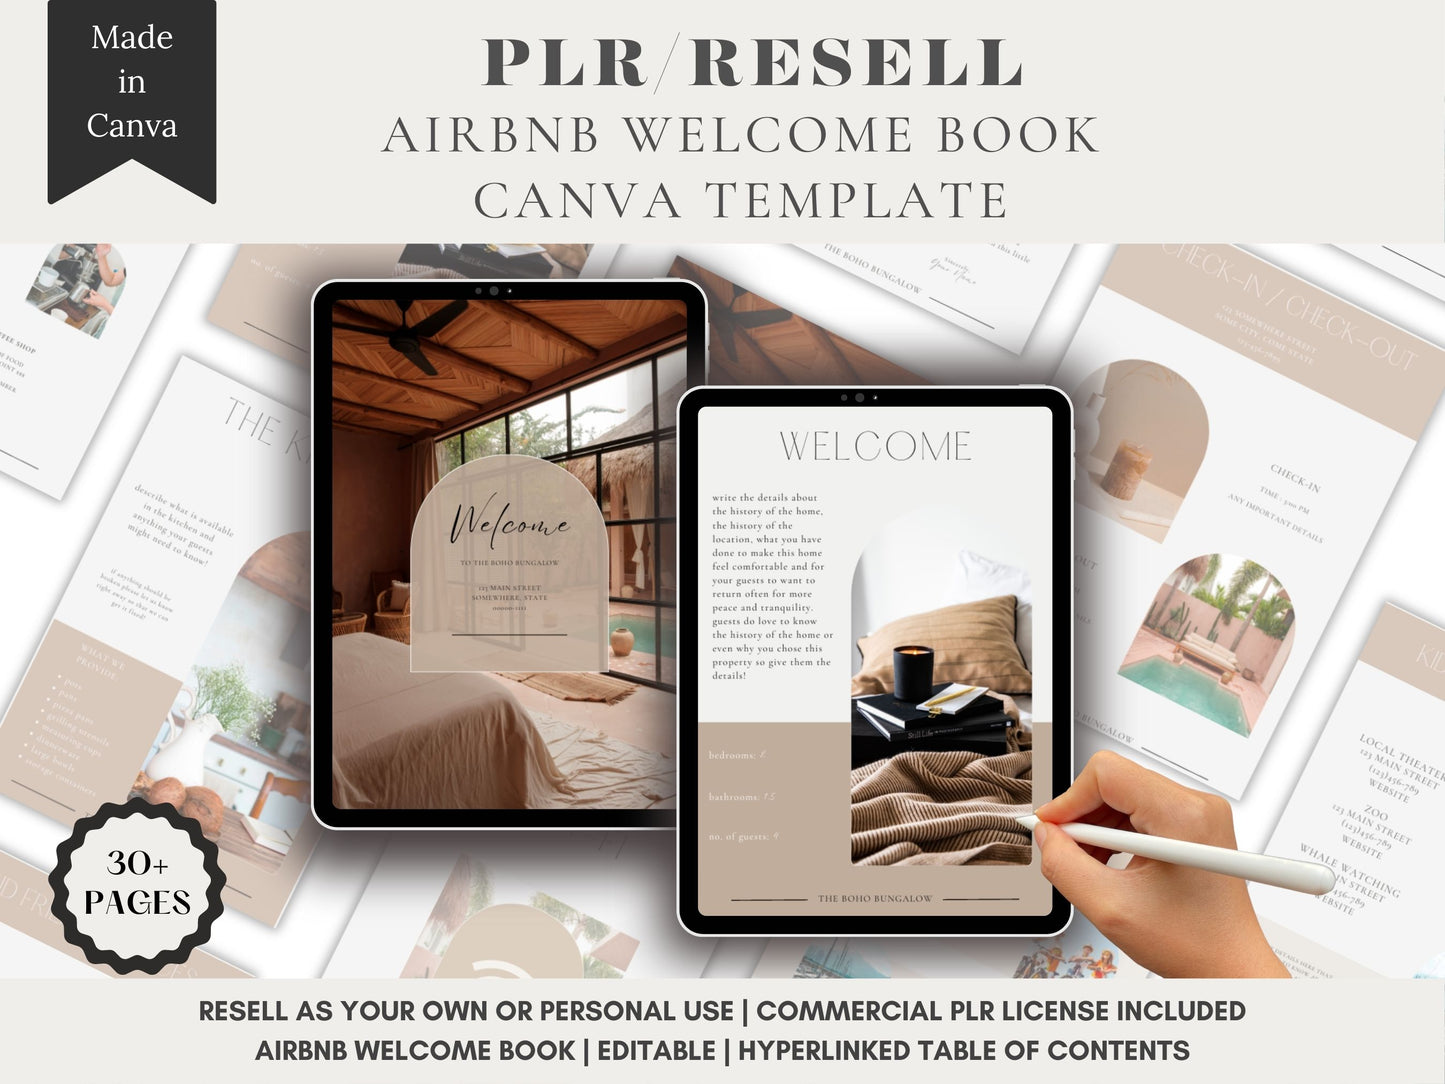 AirBNB Welcome Book PLR Canva Template Boho